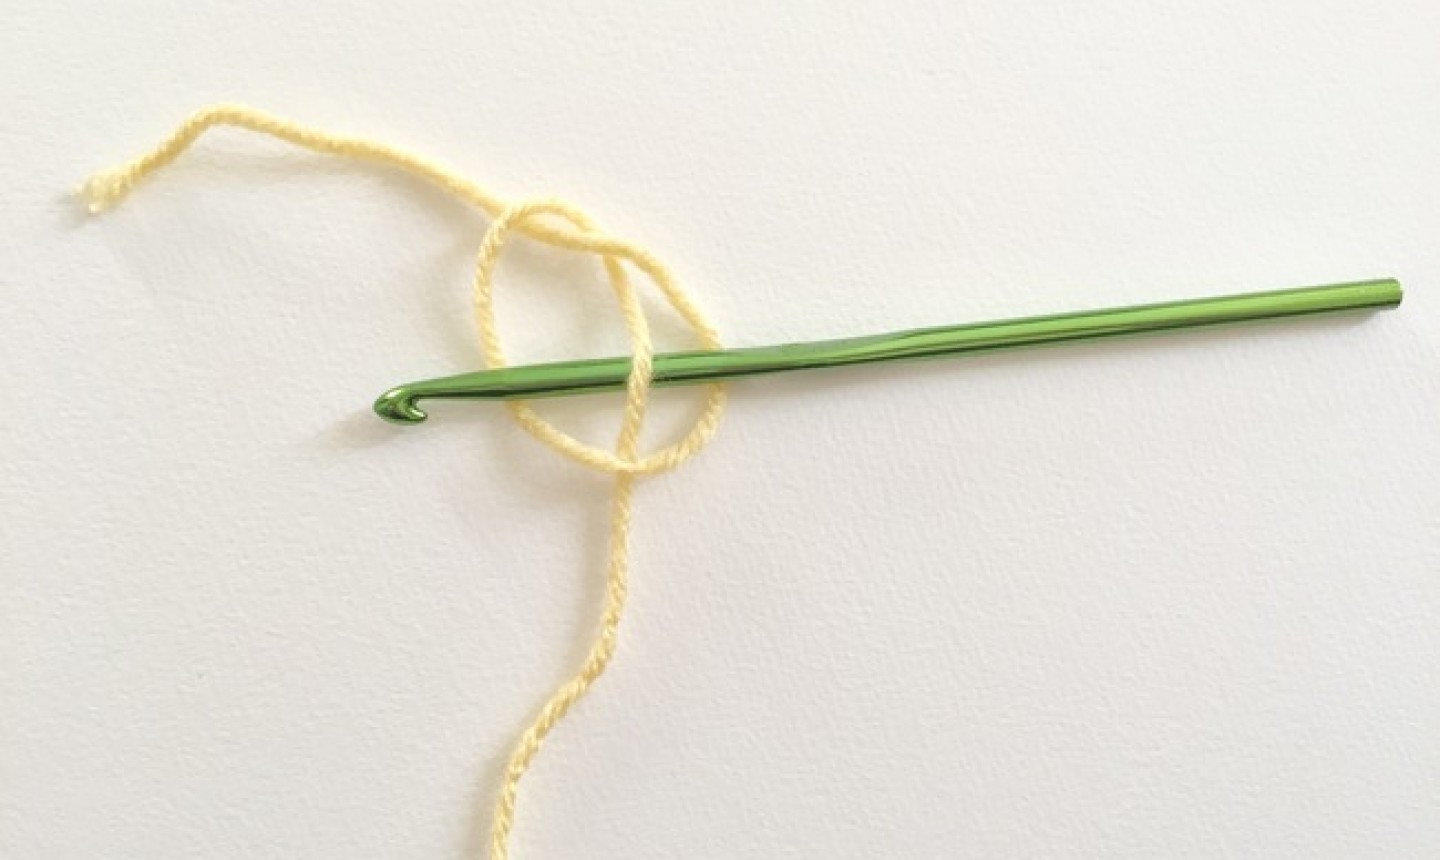 Piece of yellow yarn knotted with green hook